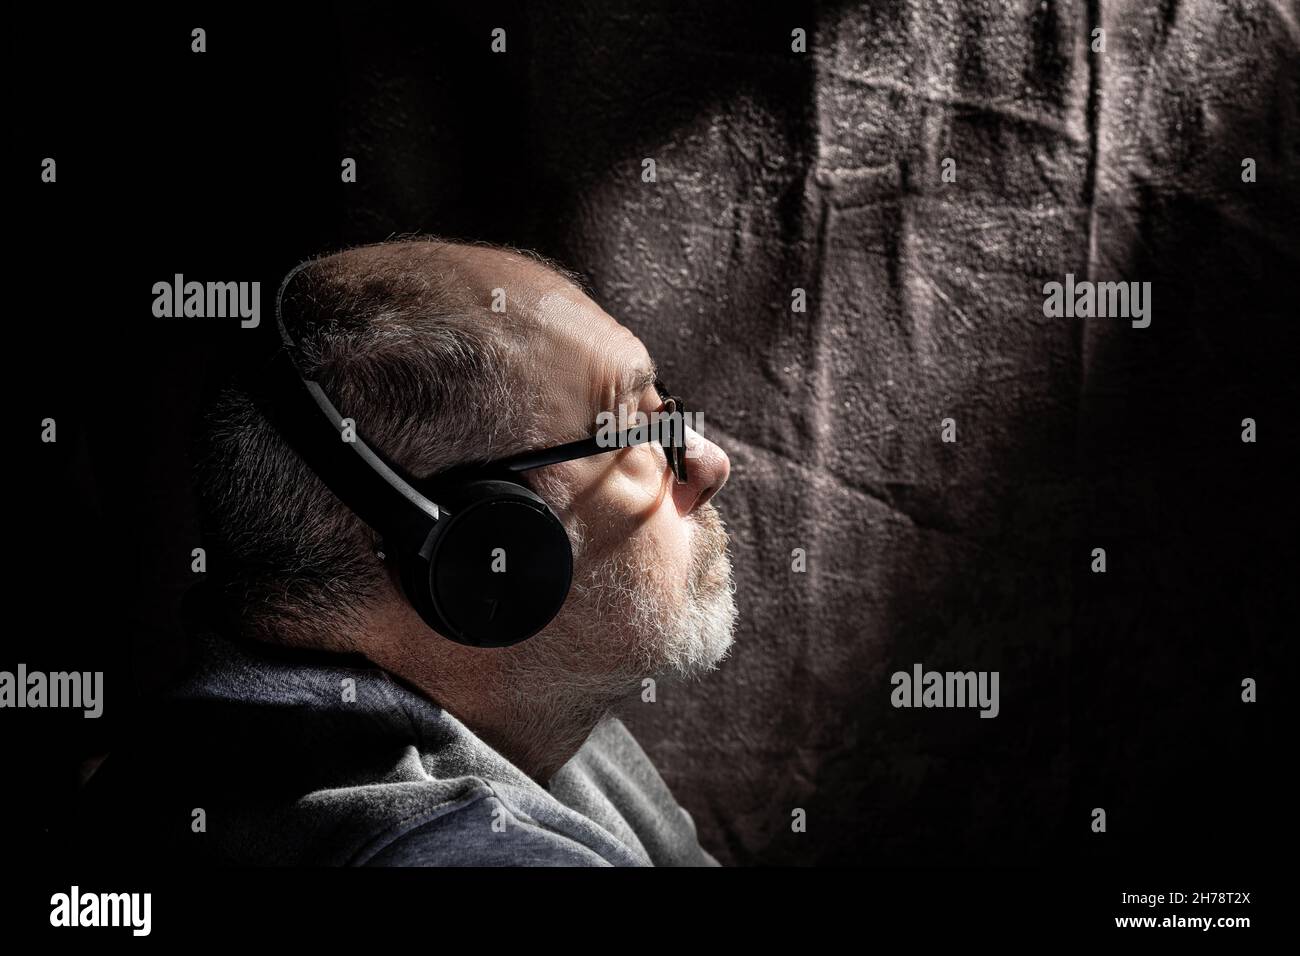 Low key profile portrait of a grey haired male listening to music through head phones Stock Photo